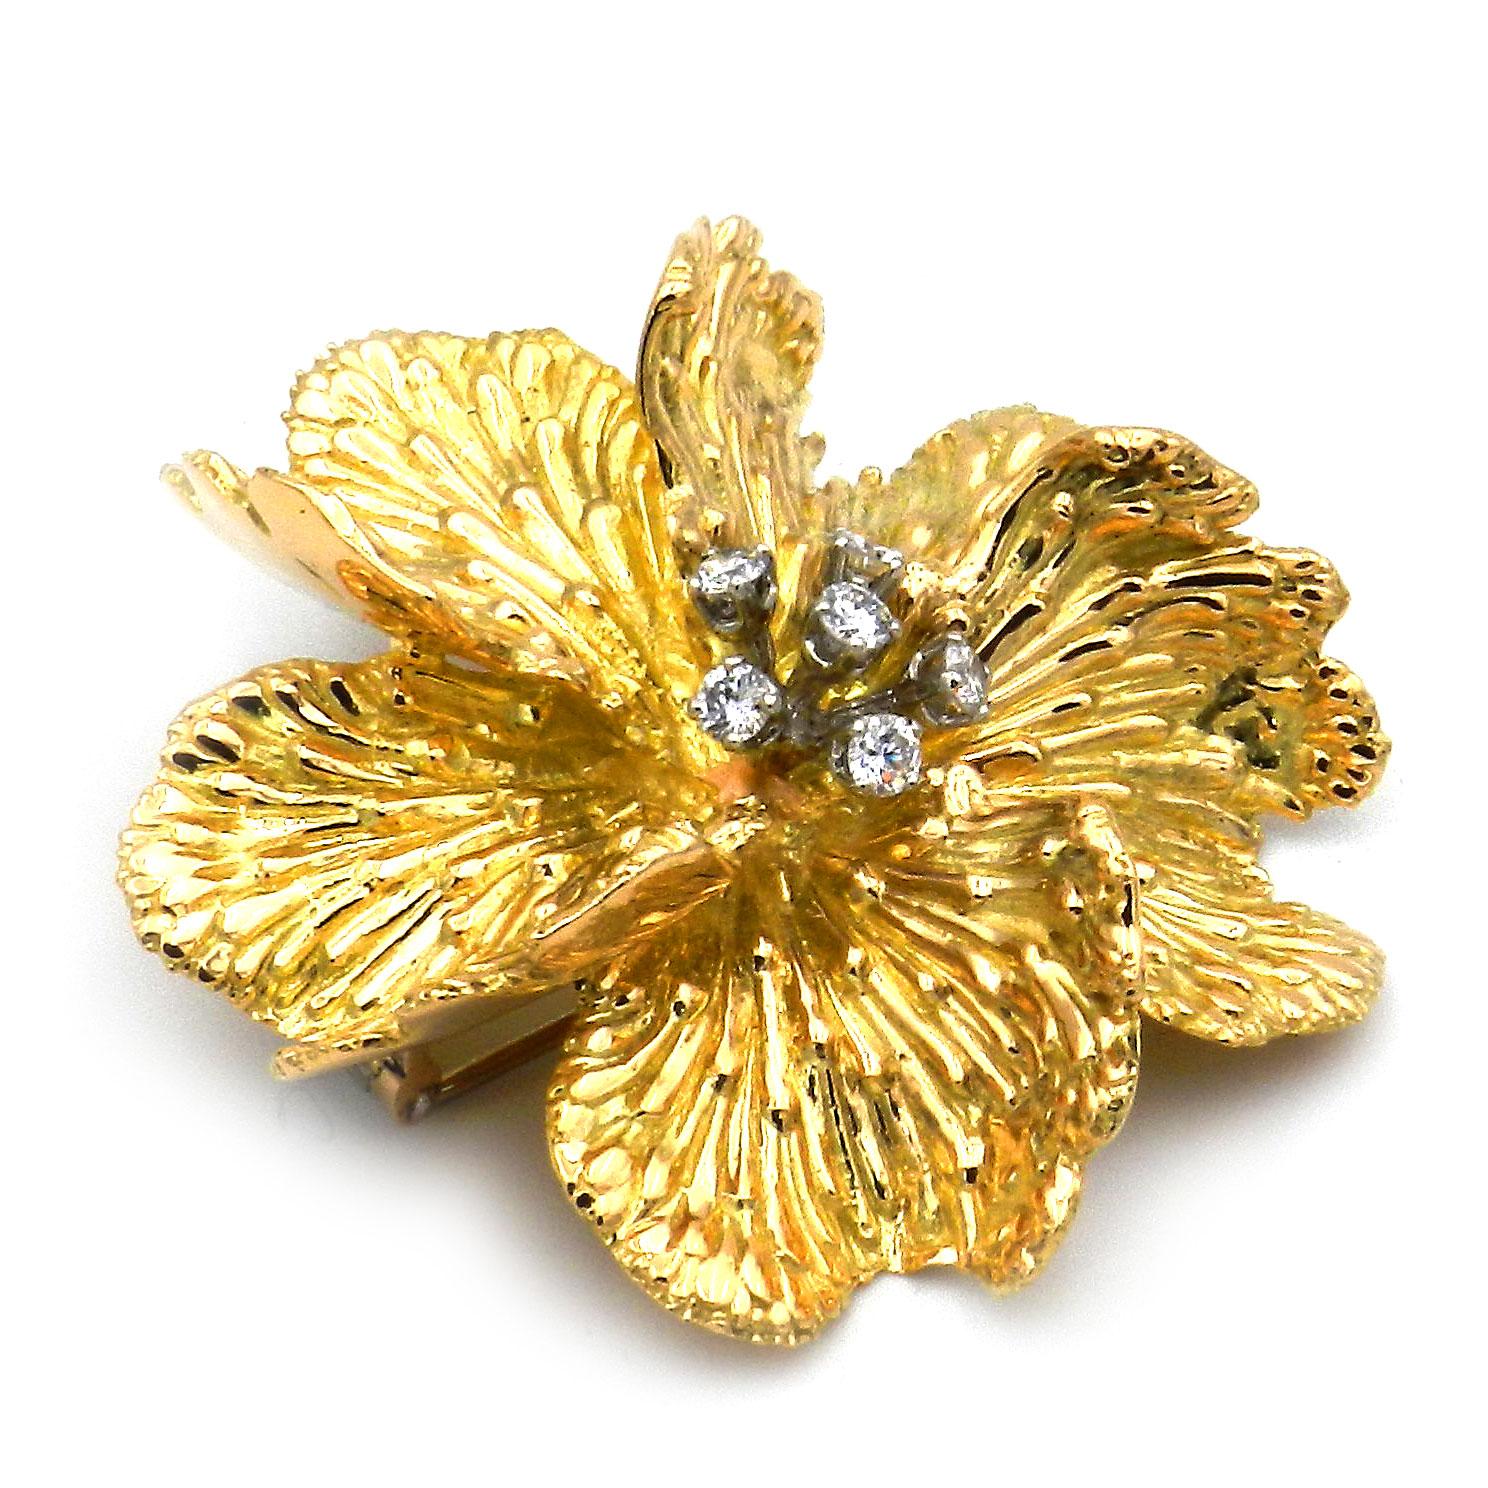 Vintage Boucheron 18K Gold Diamond Flower Brooch

This representative diamond brooch is designed as a large blossom, the naturally crafted petals sculpted by hand from high-carat, finely structured gold and centrally set with six brilliant cut